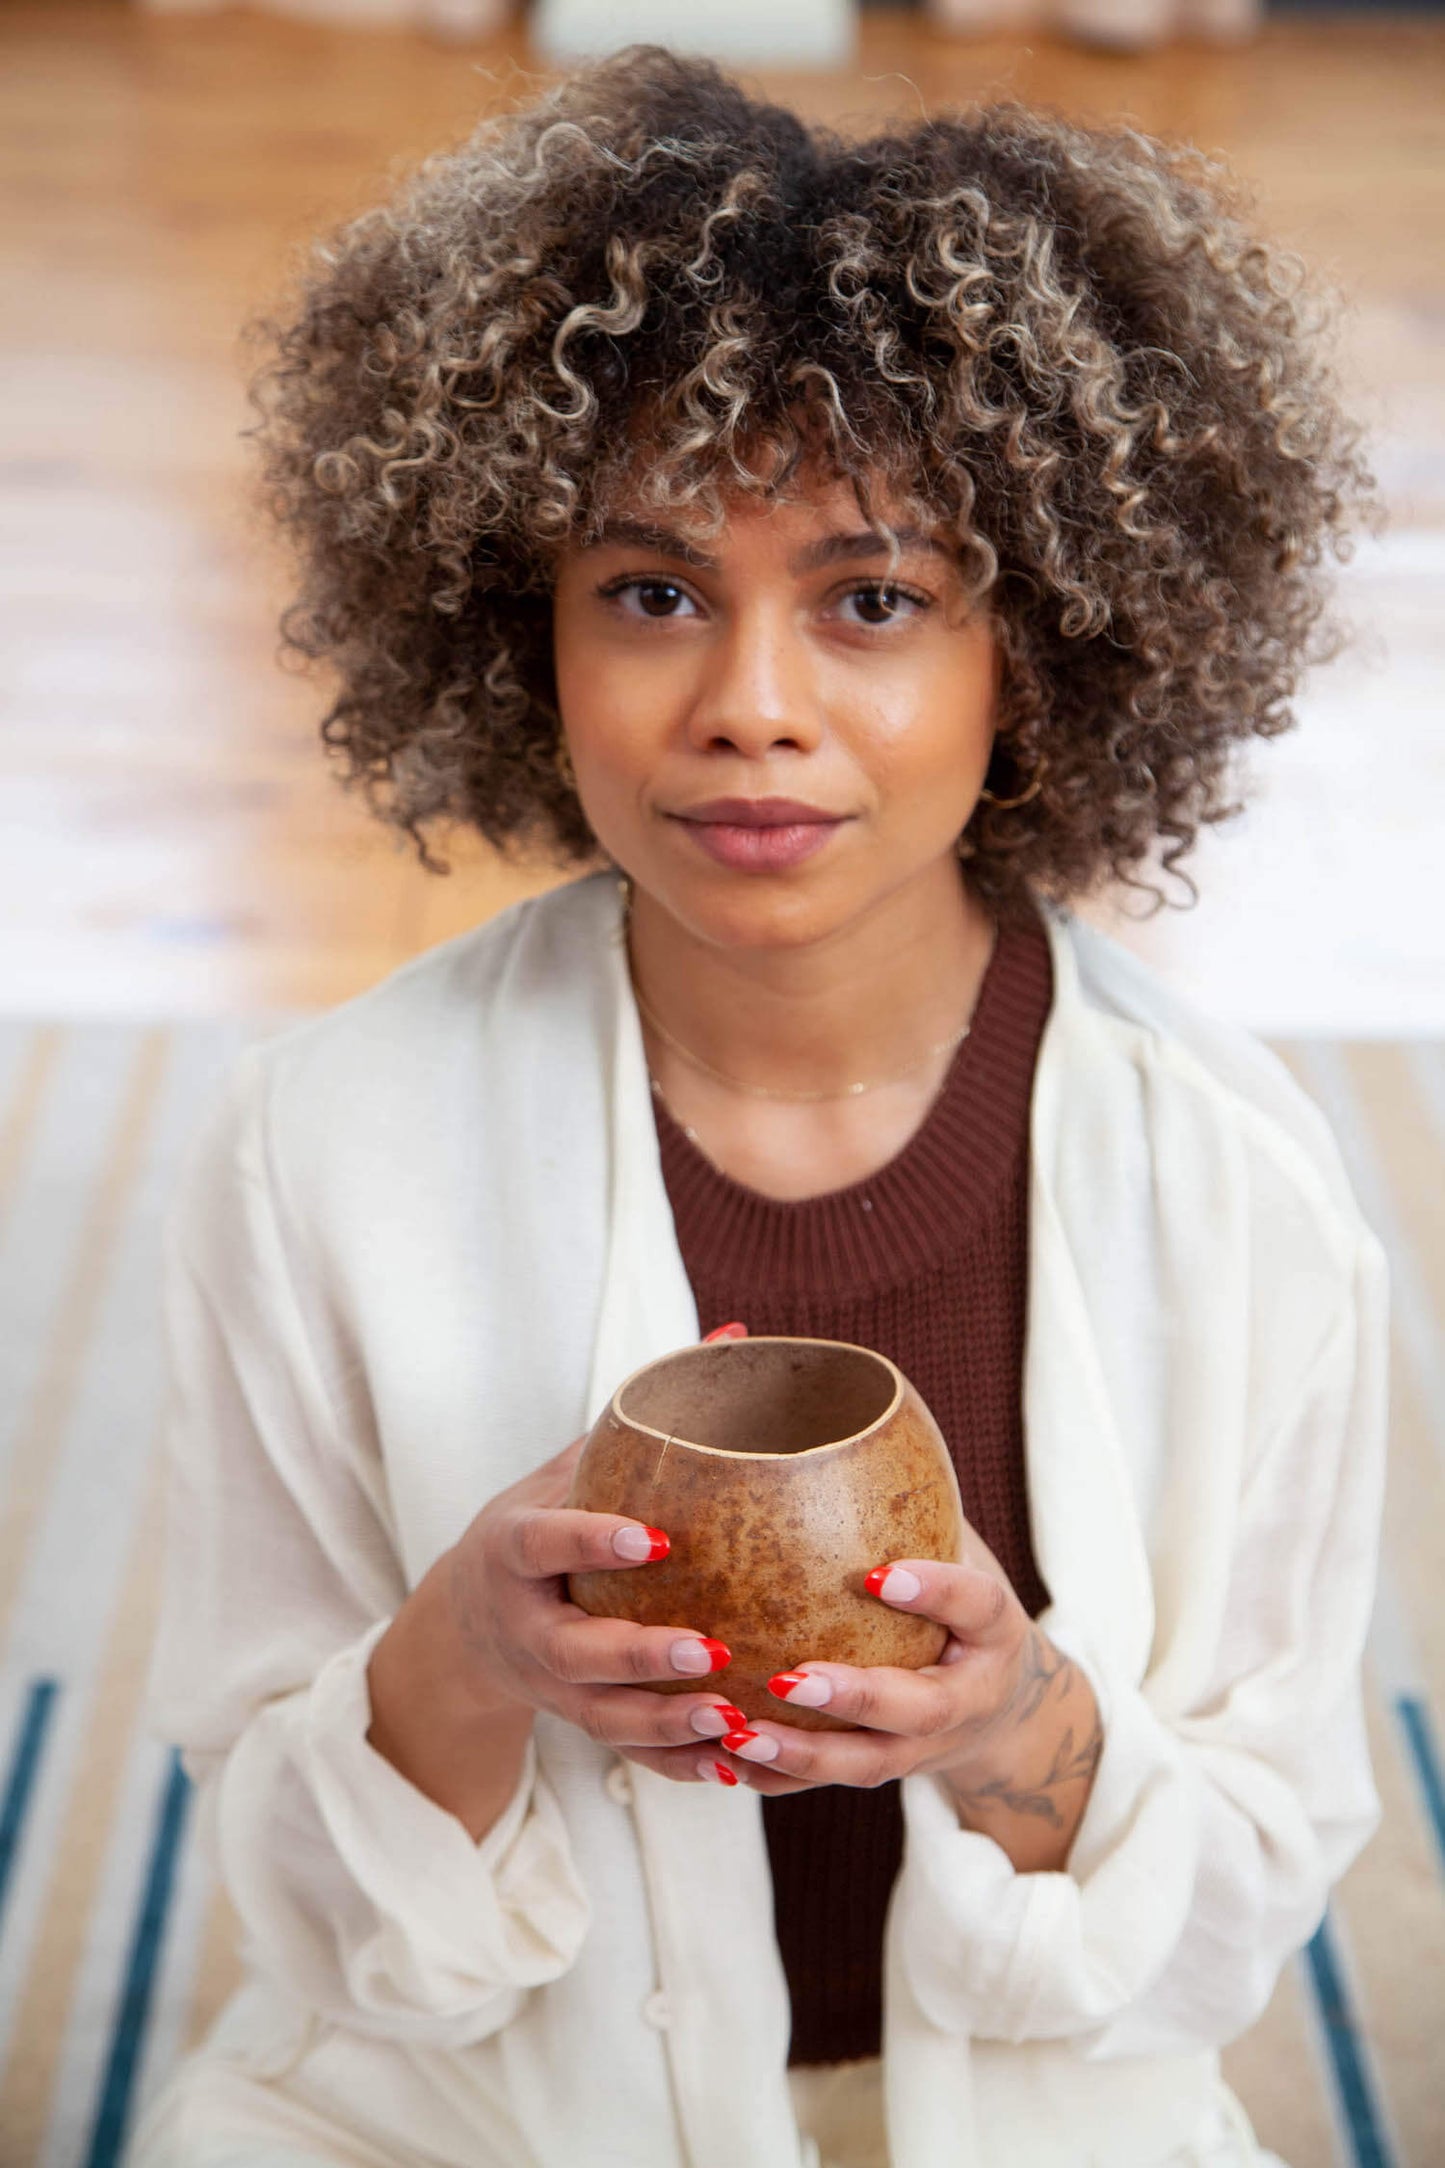 woman with curly hair holding a ceremonial gourd vessel